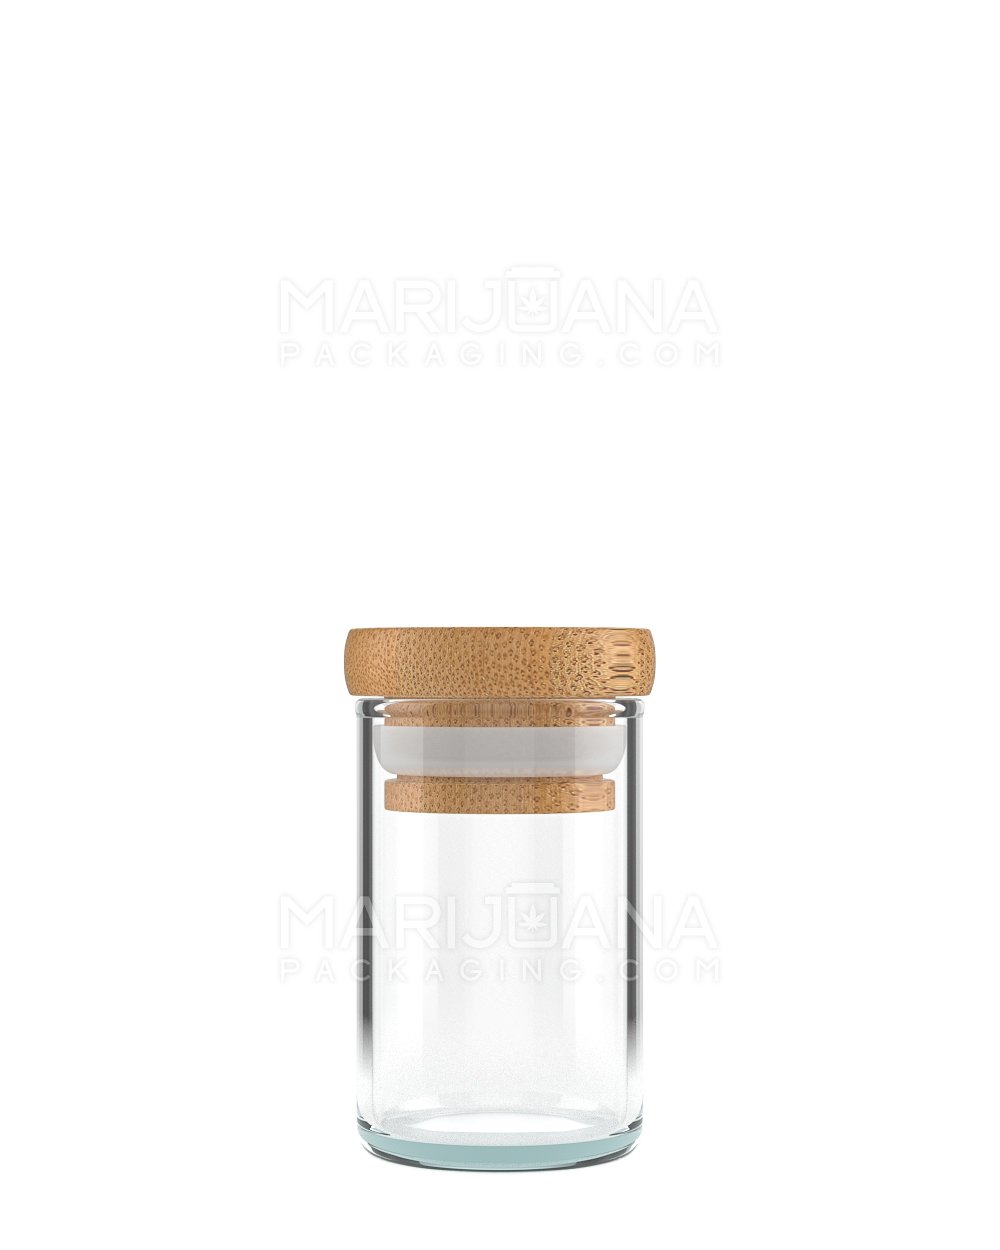 Glass Jar with Wooden Lid | 1oz - 8 Dram - 200 Count - 1